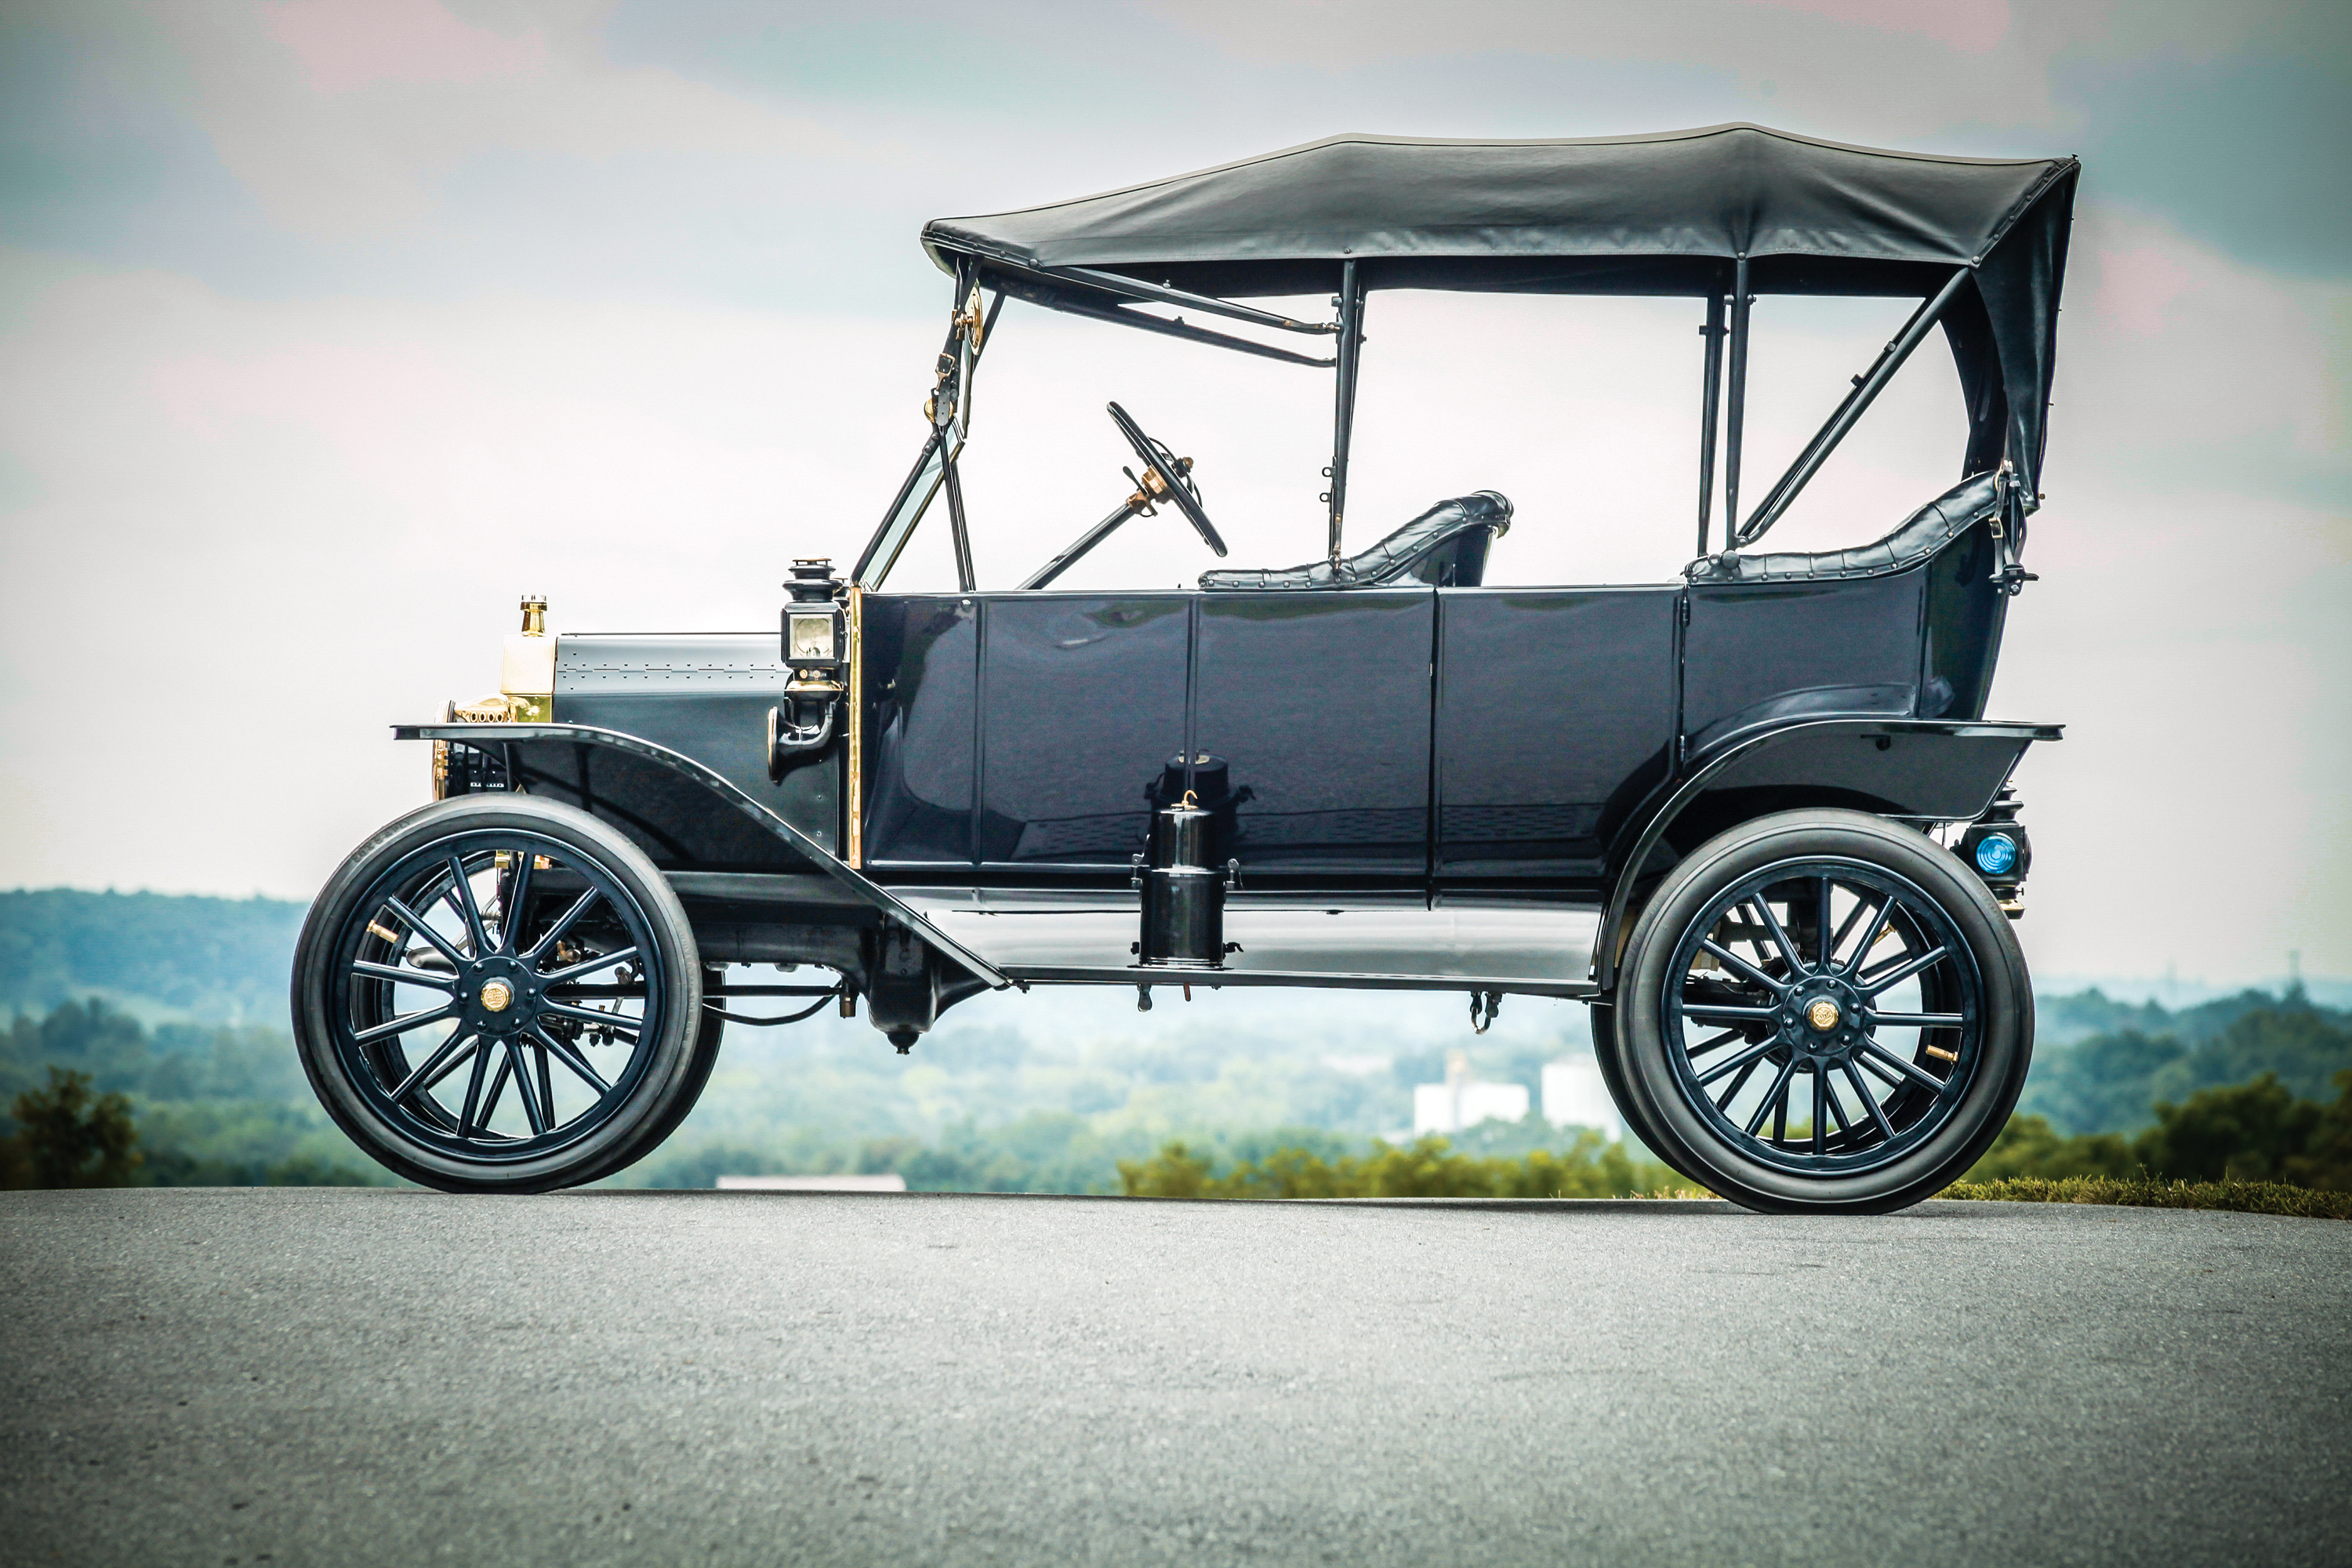 Первая машина форд. Ford t 1913. Ford model t 1913. Ford model t Touring.